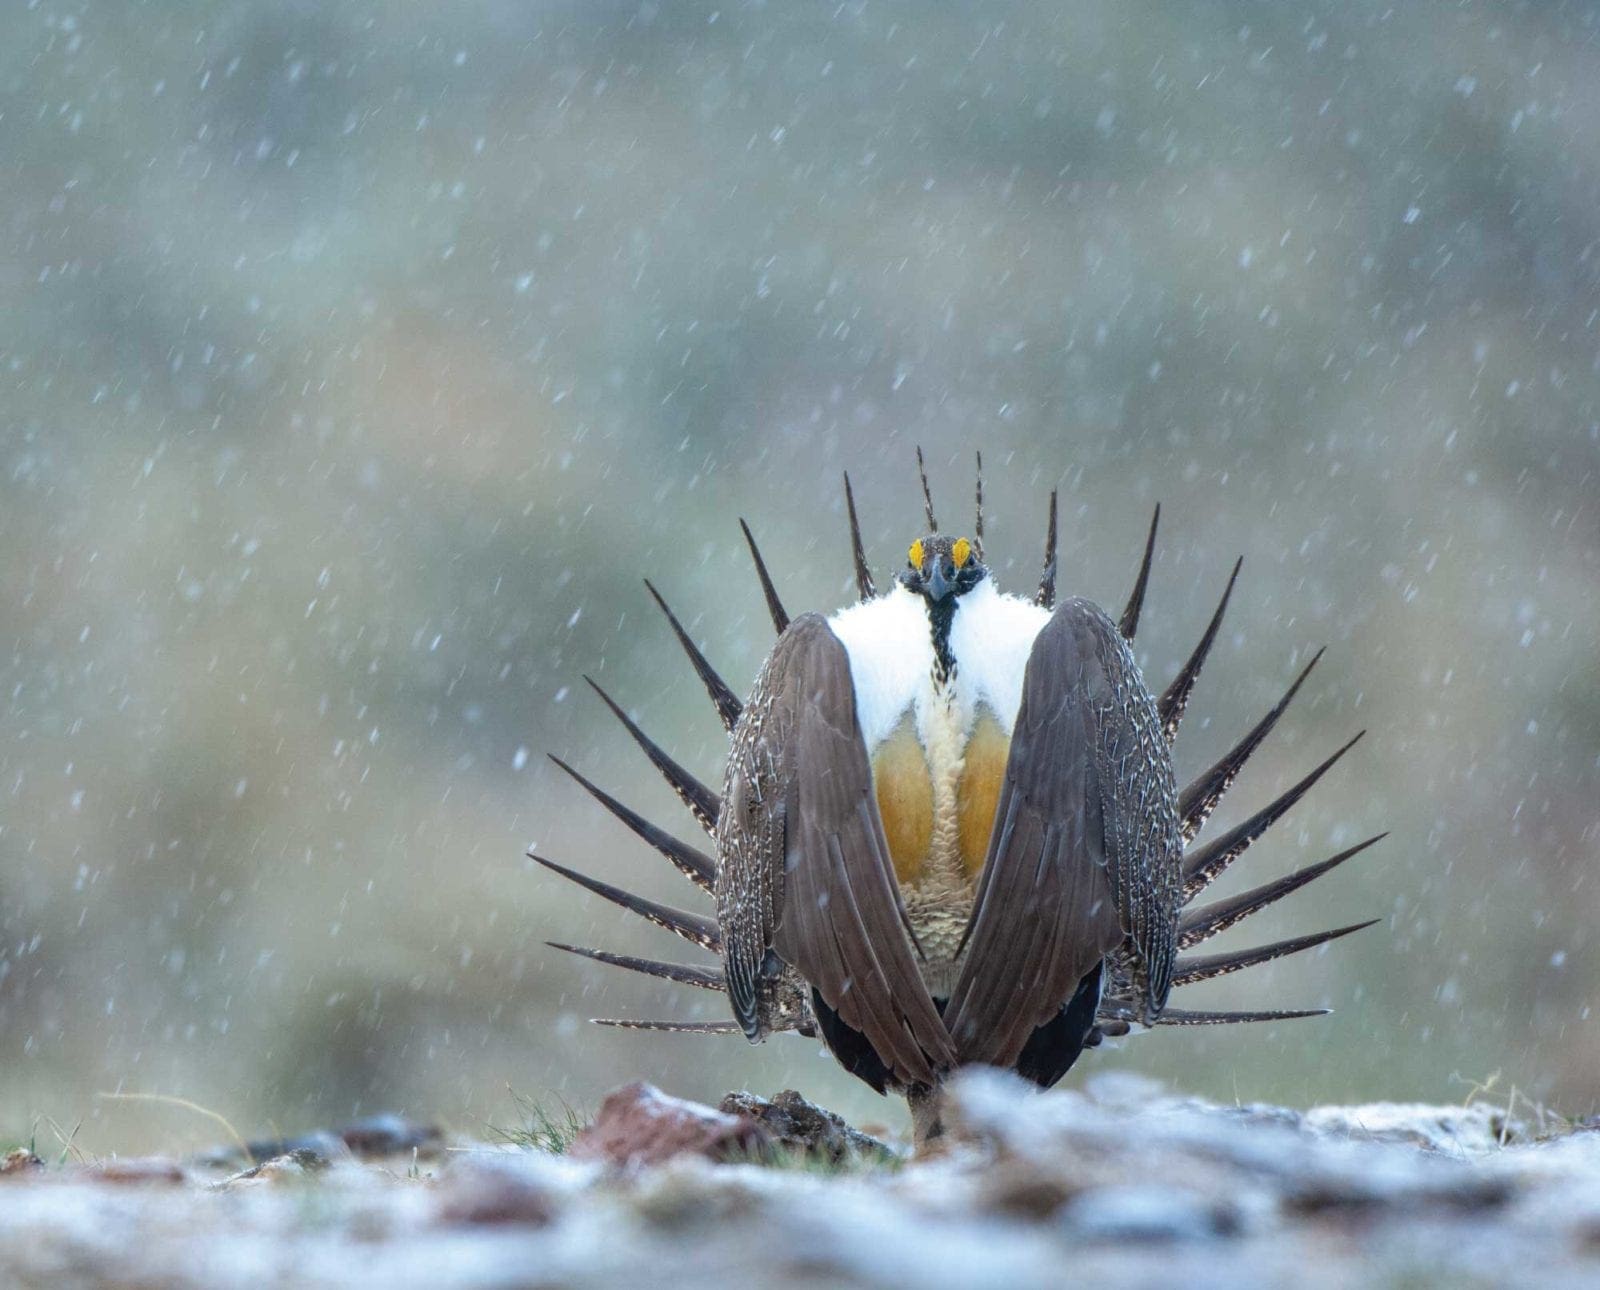 A sage grouse stands on a lek in the snow